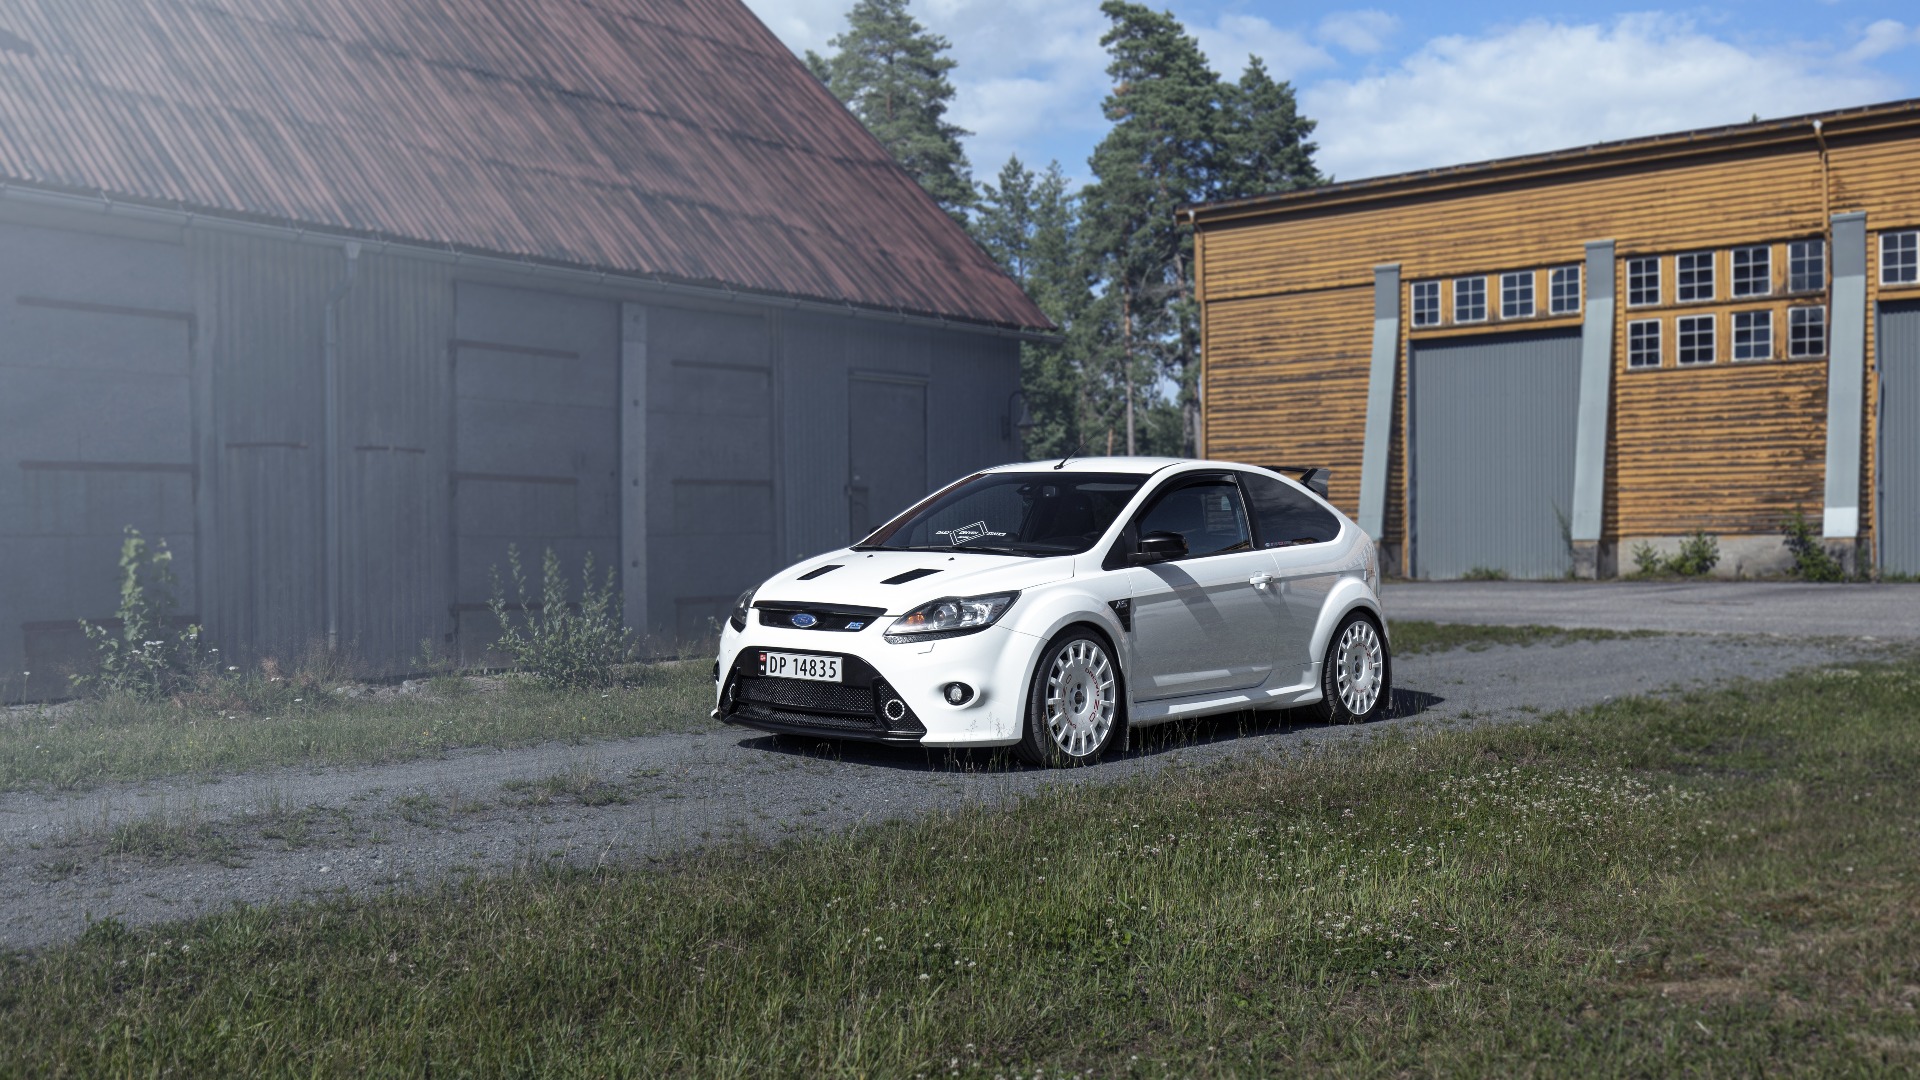 Frozen White – 2010 Ford Focus RS